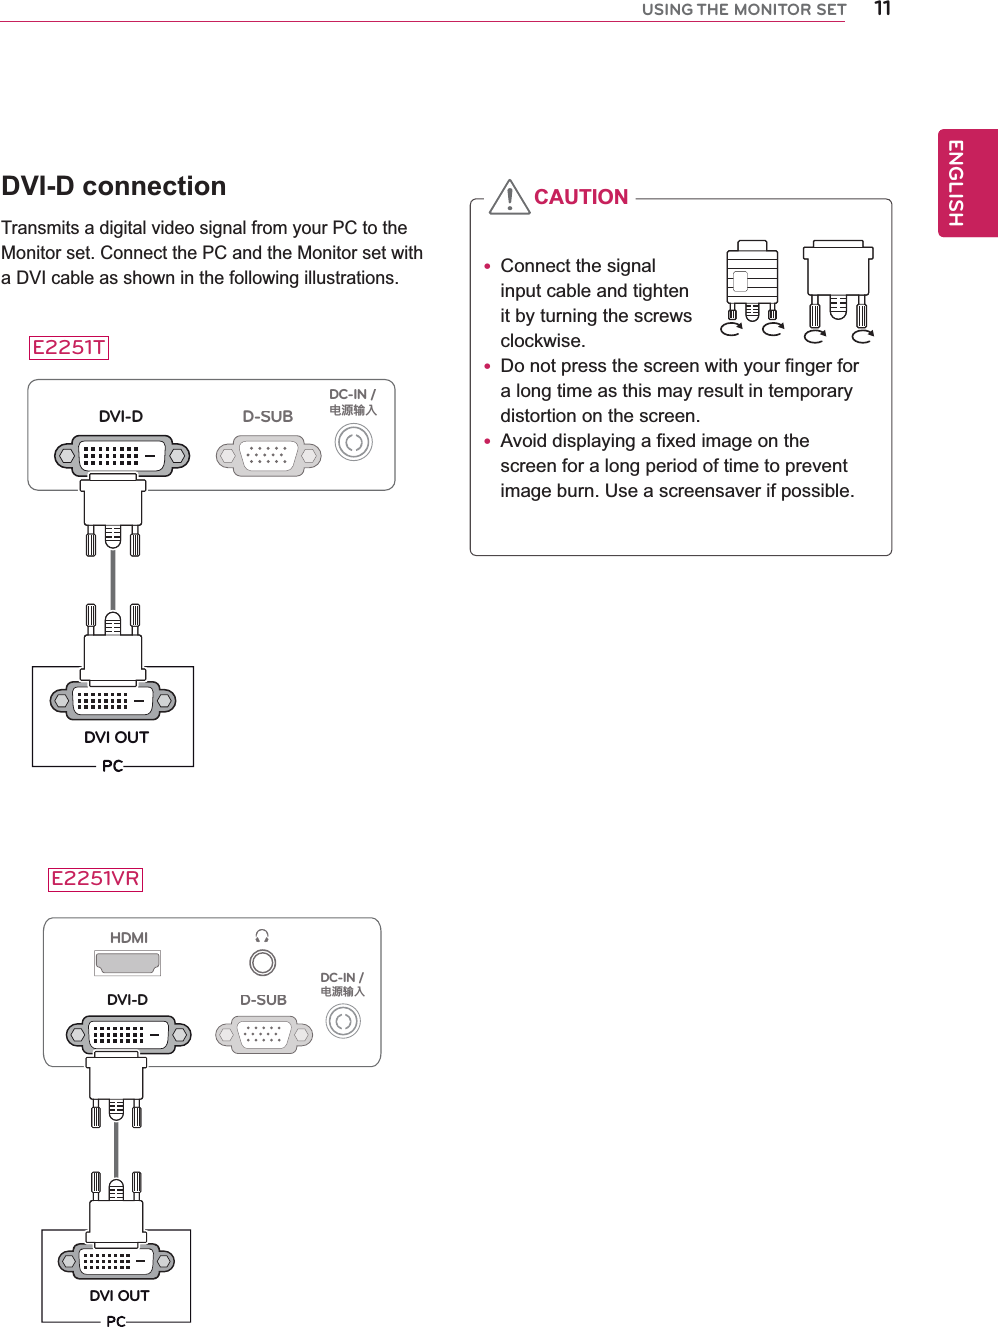 11ENGENGLISHUSING THE MONITOR SETDVI-D connectionTransmits a digital video signal from your PC to the Monitor set. Connect the PC and the Monitor set with a DVI cable as shown in the following illustrations.D-SUBDVI-DDVI OUTDC-IN /䏳㵎幑‣HDMID-SUBDVI-DDVI OUTDC-IN /䏳㵎幑‣y Connect the signal input cable and tighten it by turning the screws clockwise.y Do not press the screen with your finger for  a long time as this may result in temporary distortion on the screen.y Avoid displaying a fixed image on the screen for a long period of time to prevent image burn. Use a screensaver if possible.CAUTIONE2251TE2251VR